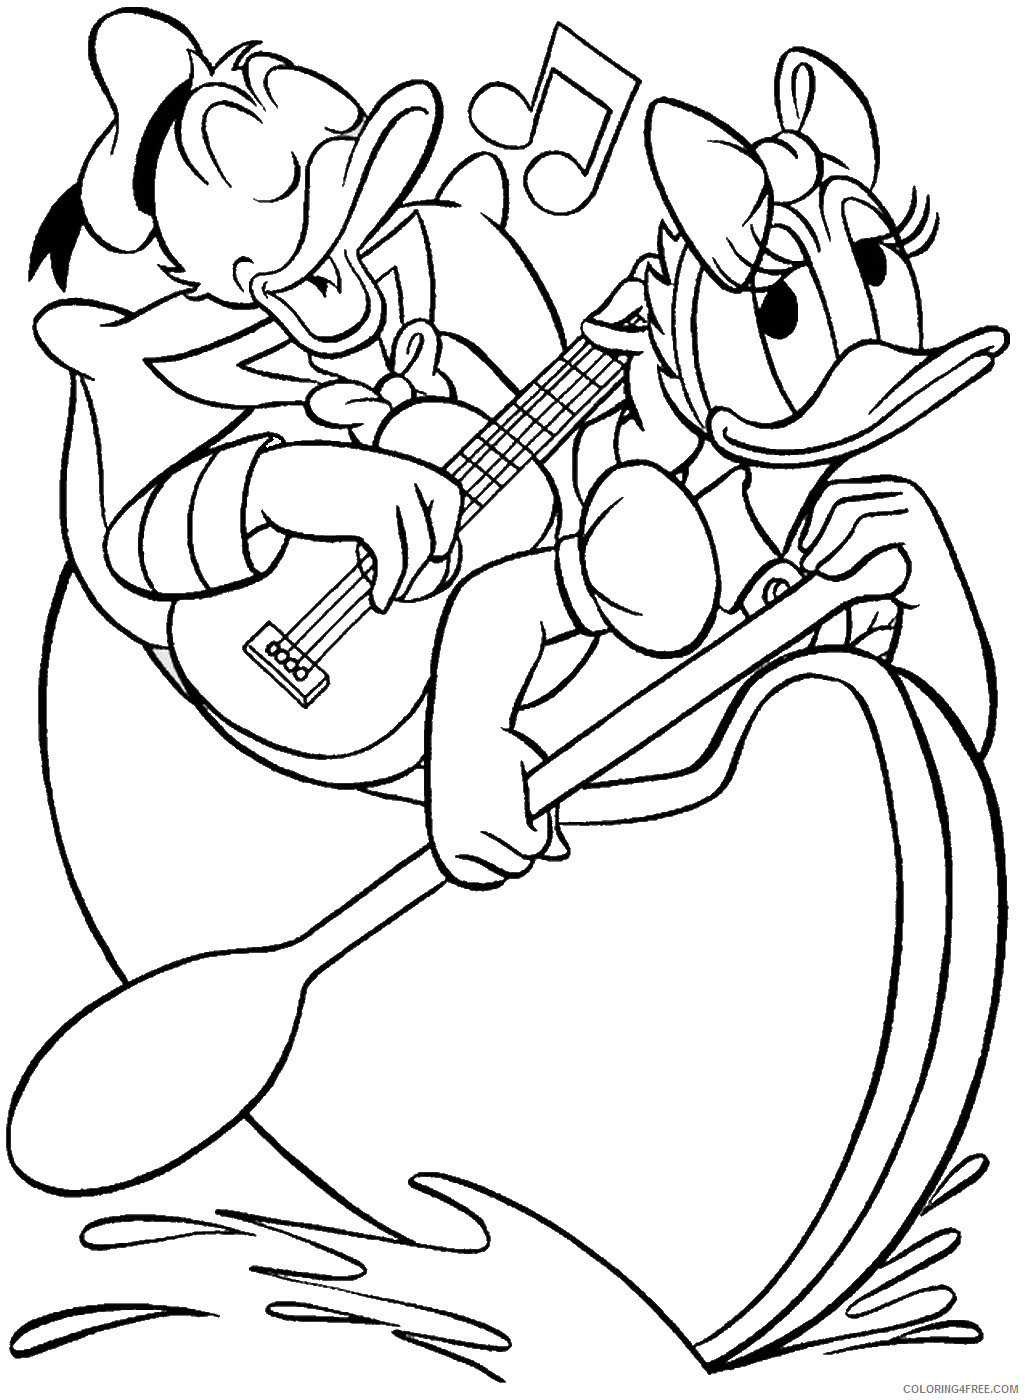 Donald and Daisy Duck Coloring Pages Cartoons donald_34 Printable 2020 2469 Coloring4free